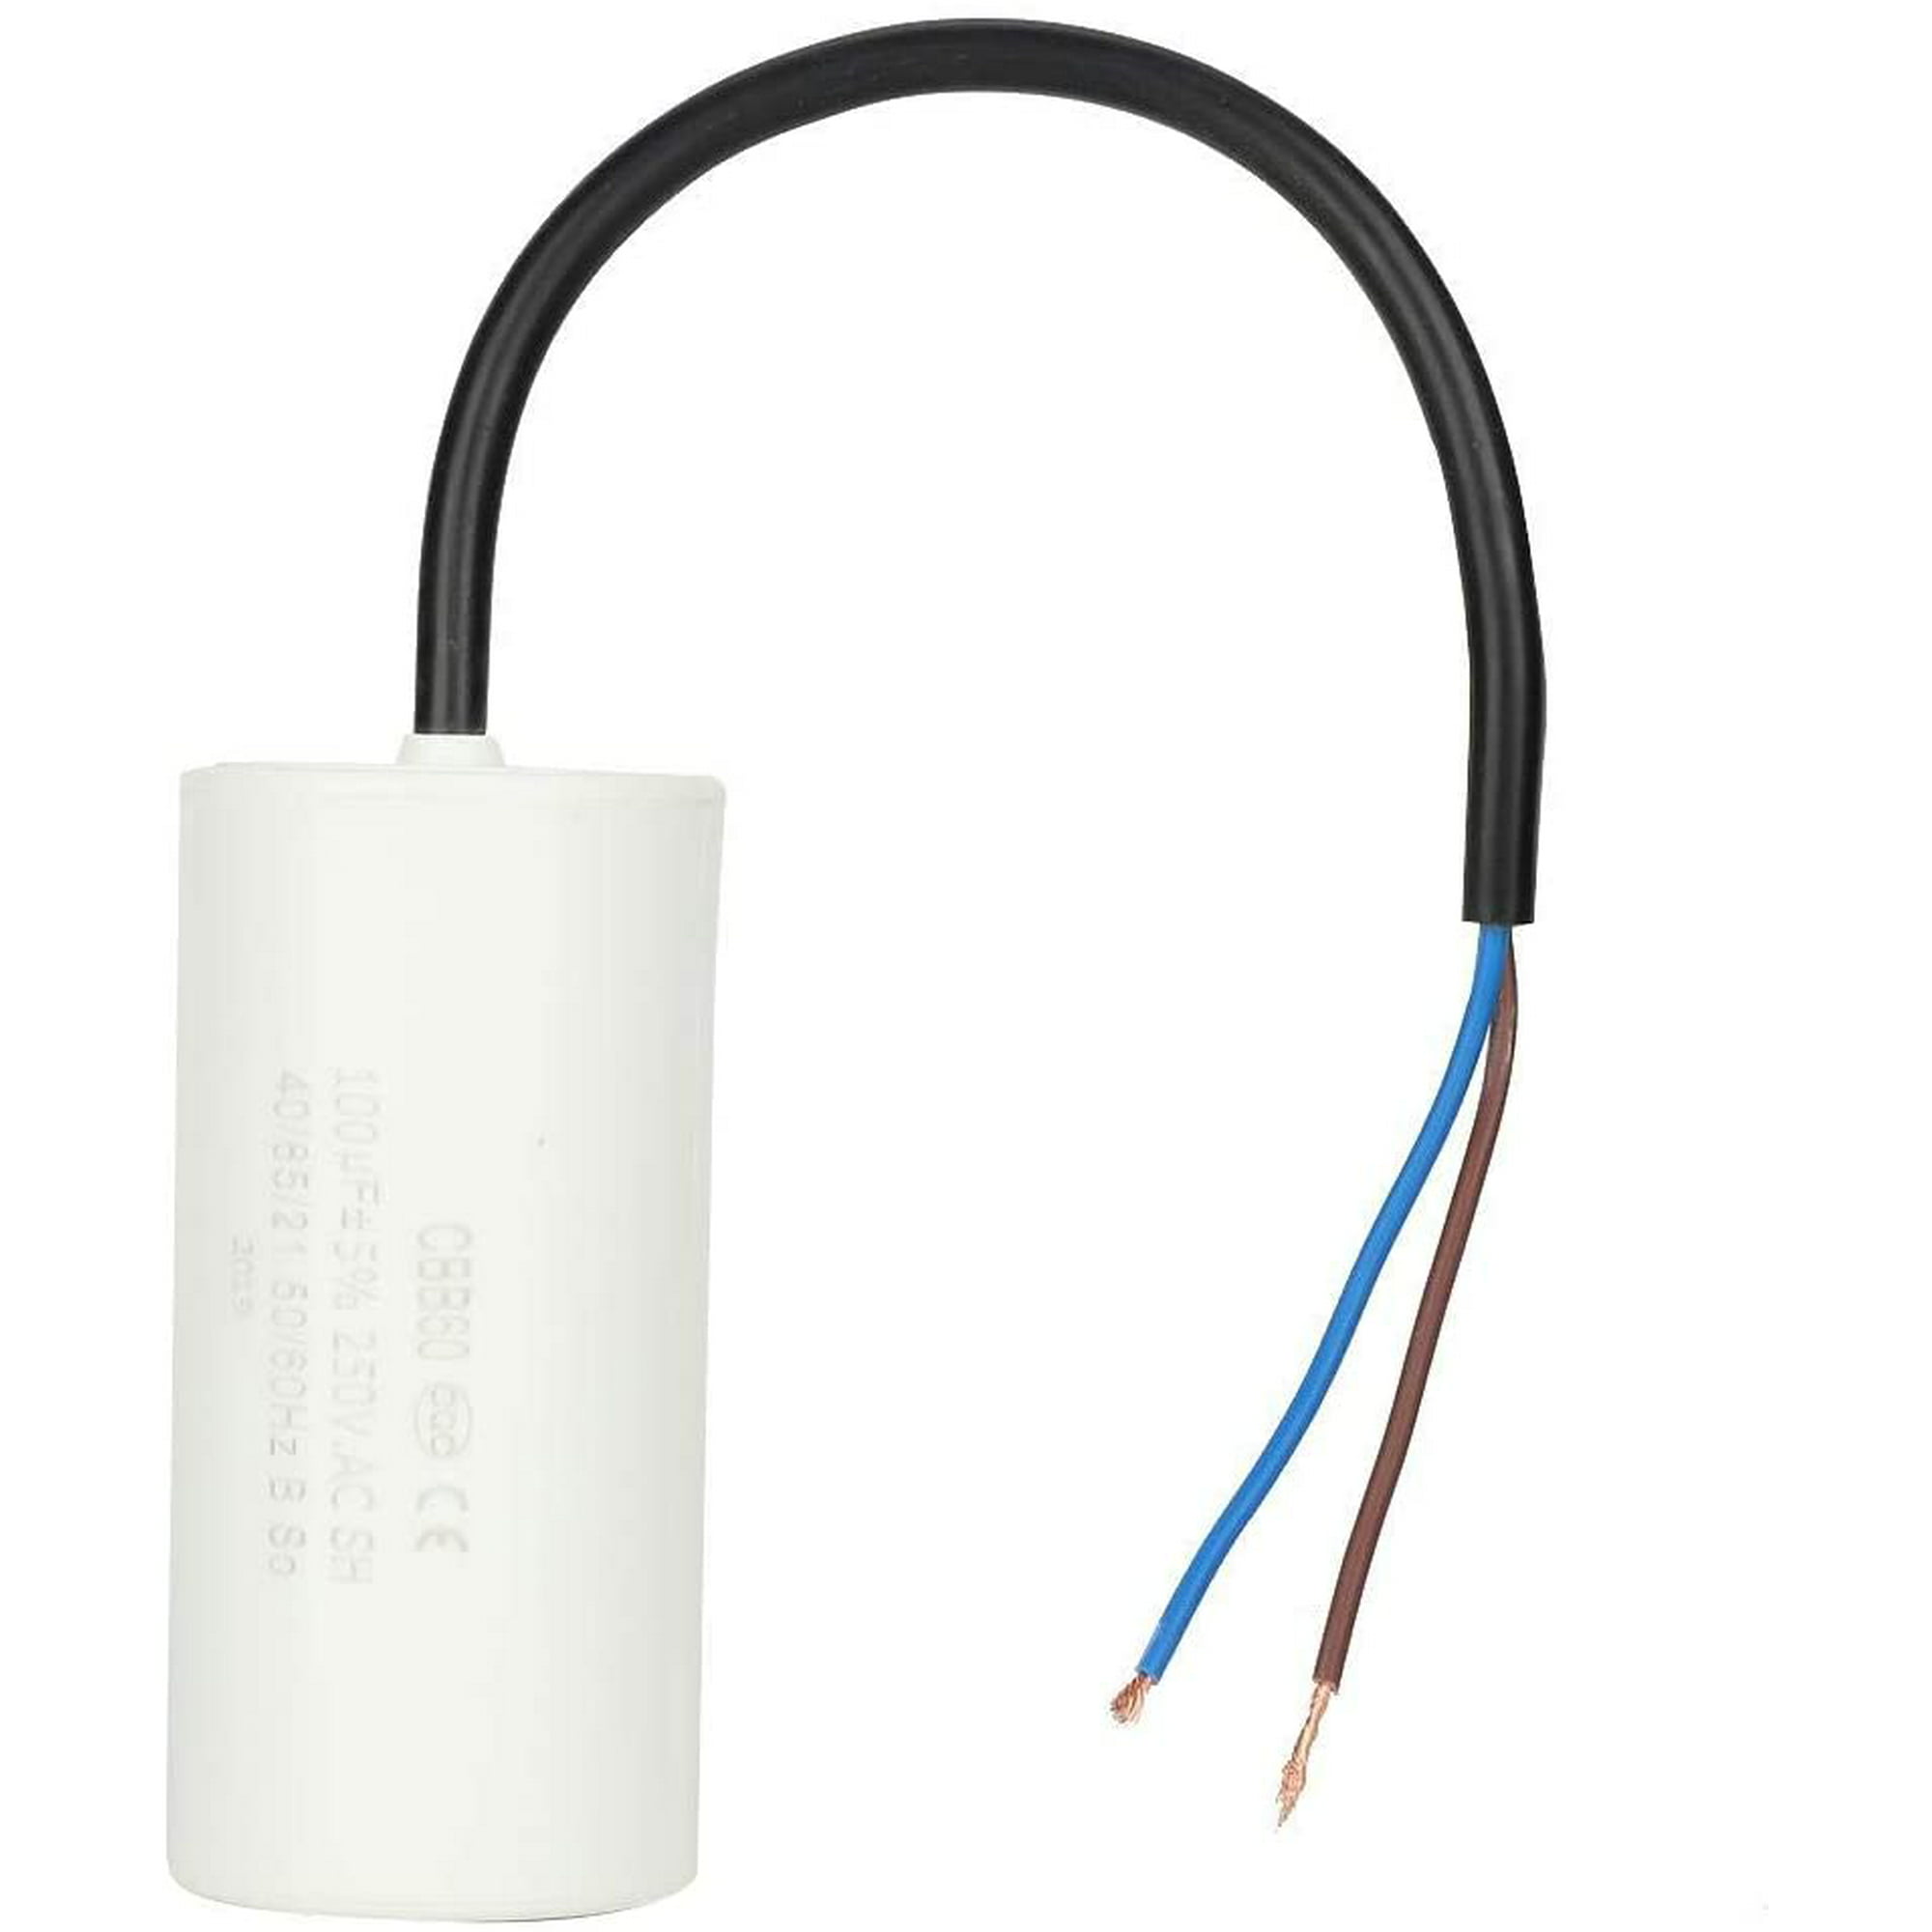 CBB60 Run Capacitor with Wire Lead 250V AC100uF 50/60Hz for Motor Air Compressor